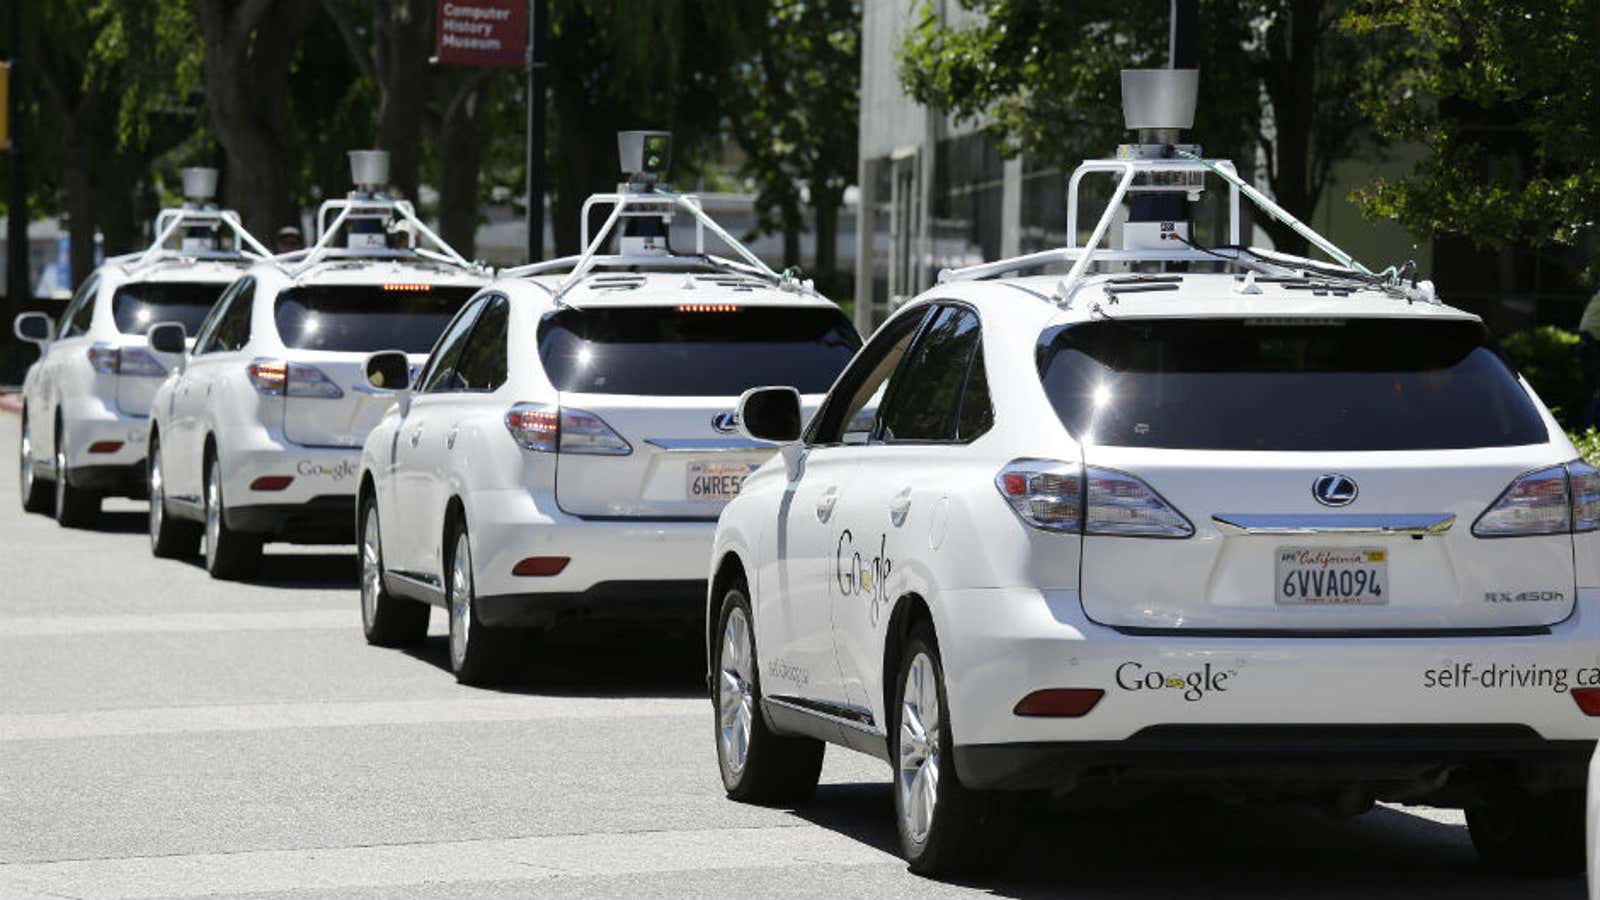 Google has made a splash with its own driverless car program.